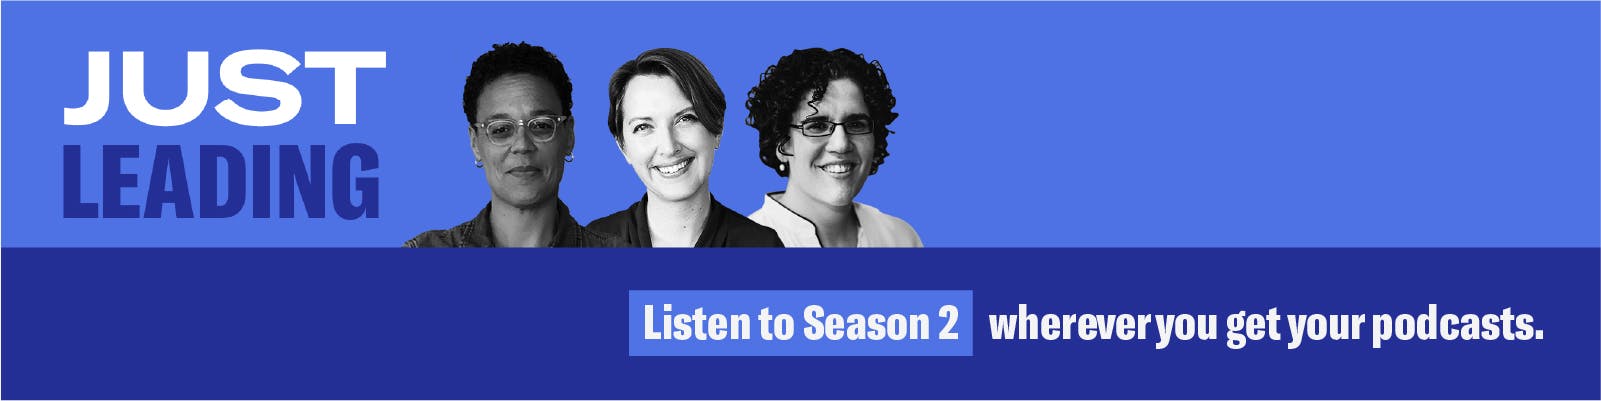 Just Leading: Listen to Season 2 wherever you get your podcasts